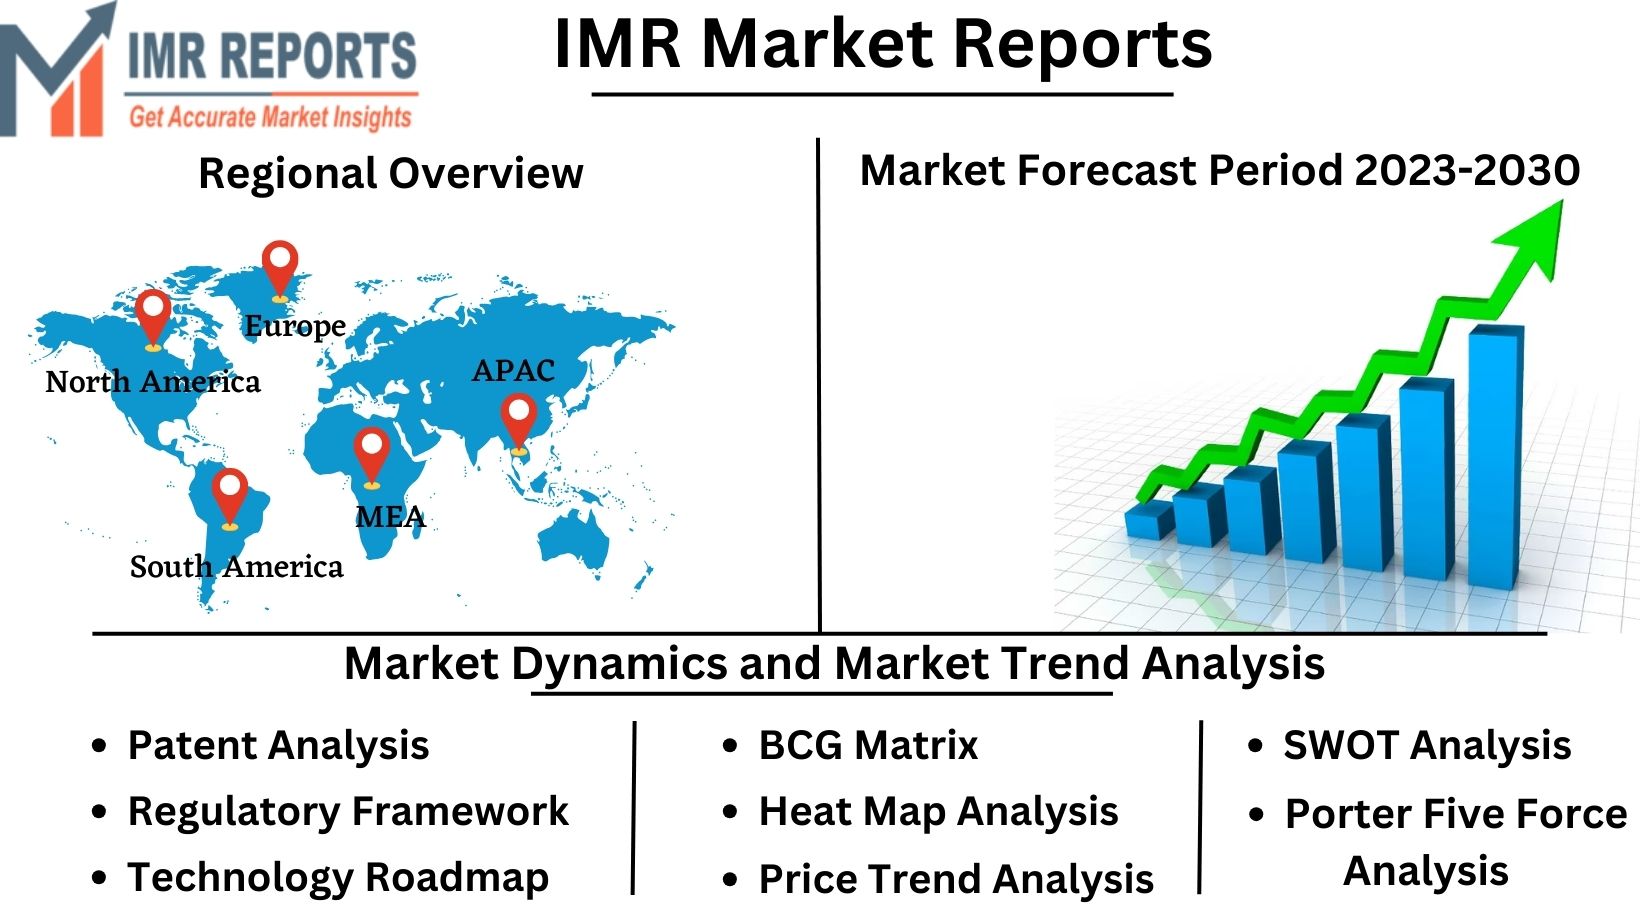 IMR_Market_Reports_(1)83